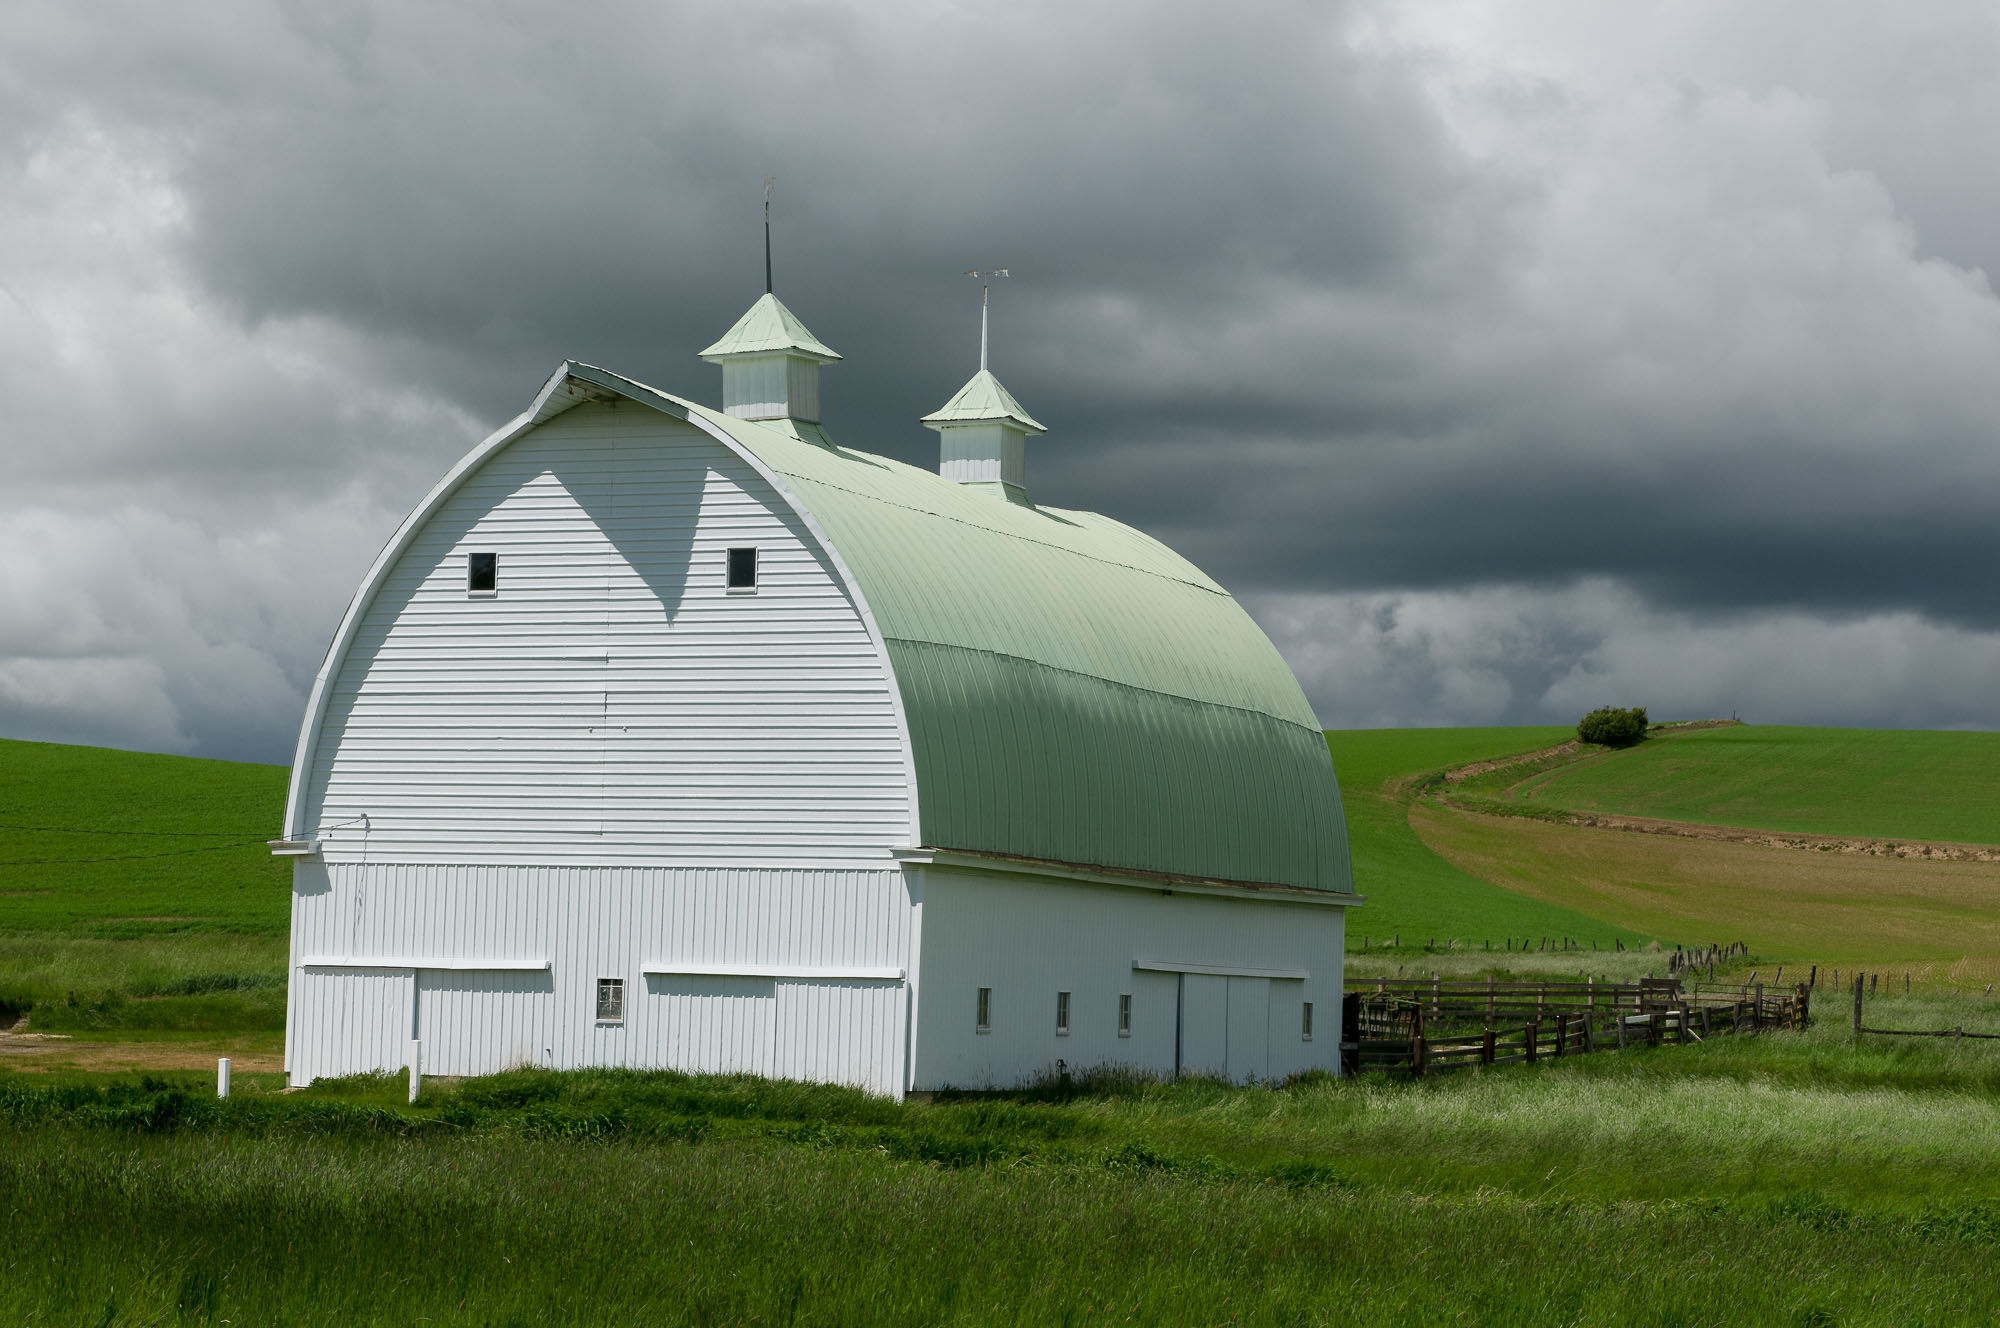 Barbee_080606_3_6168 |  White barn with green roof and two cupolas along Palouse Cove Road, ID. Palouse region of southeast WA and western ID.